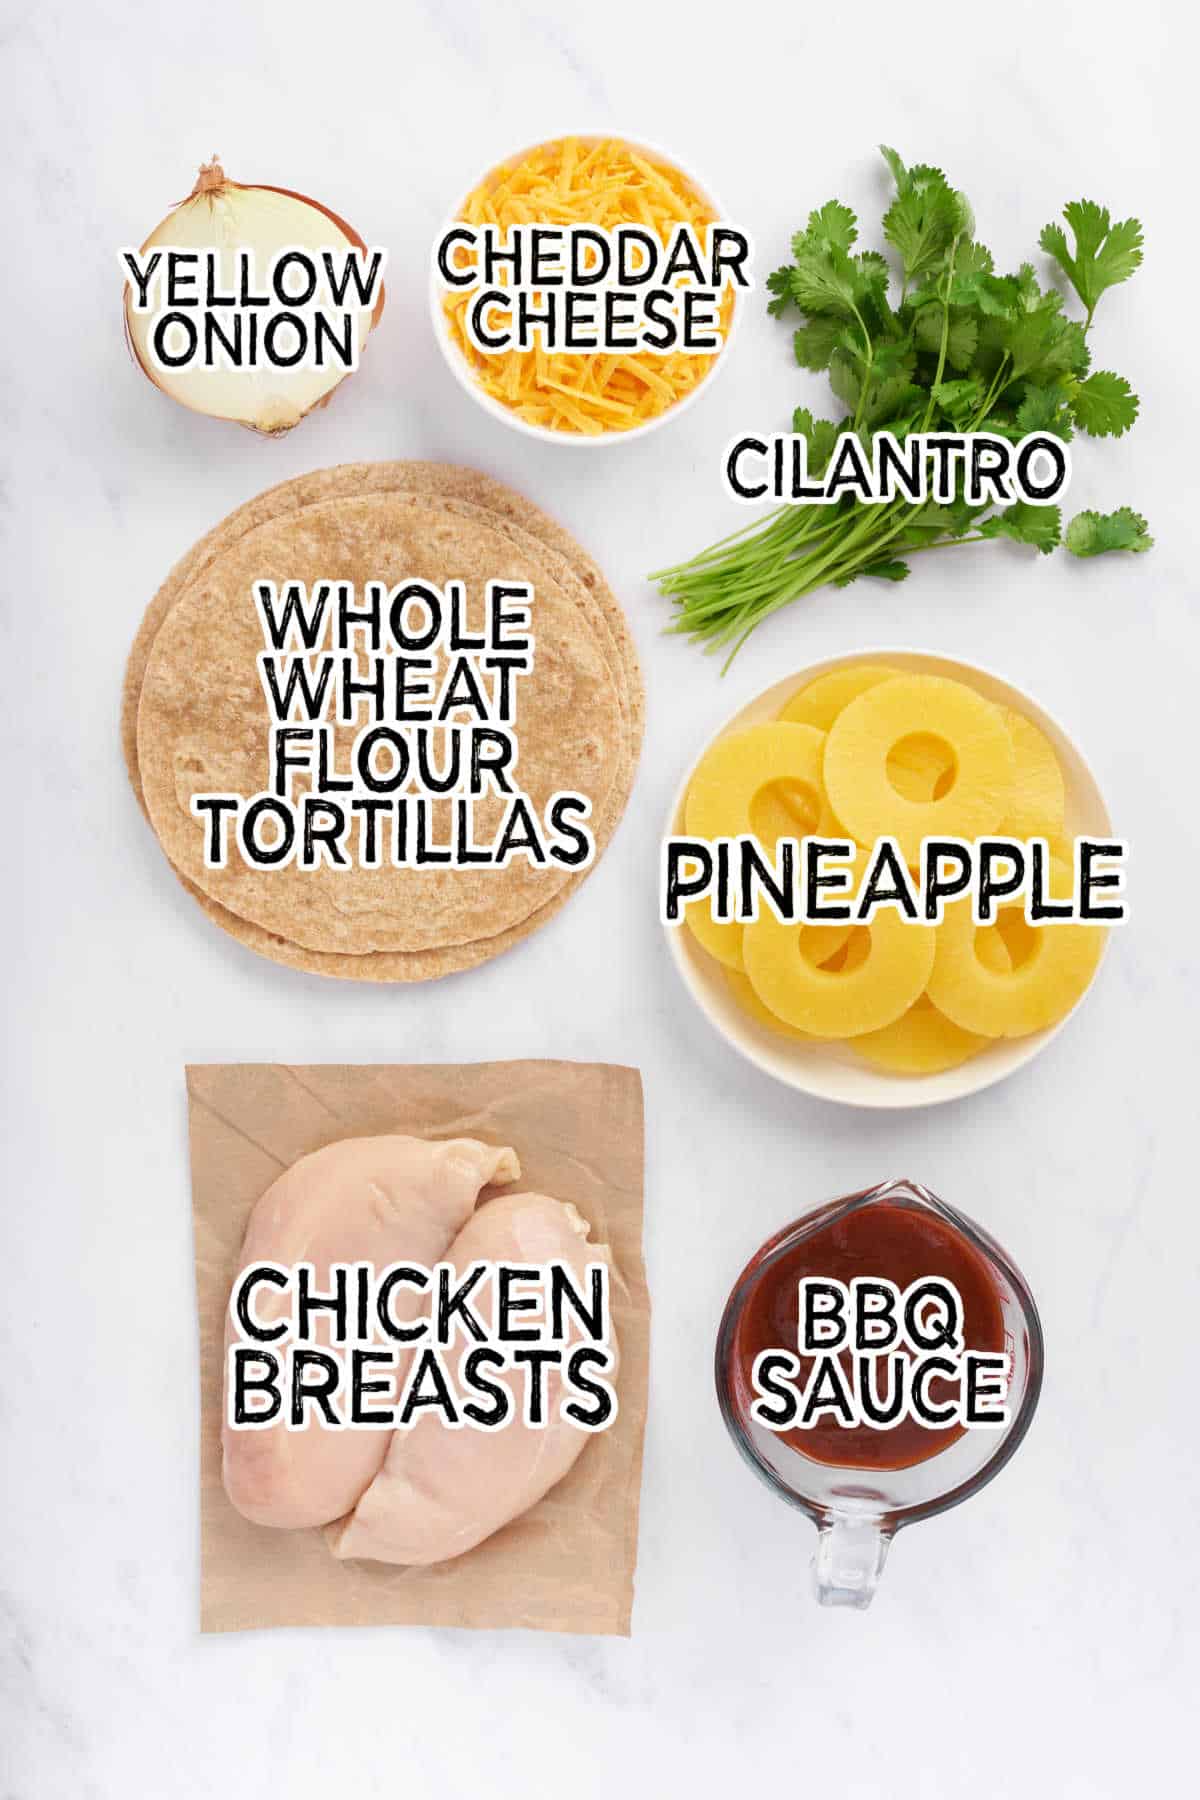 Ingredients to make BBQ Chicken and Pineapple Quesadillas.